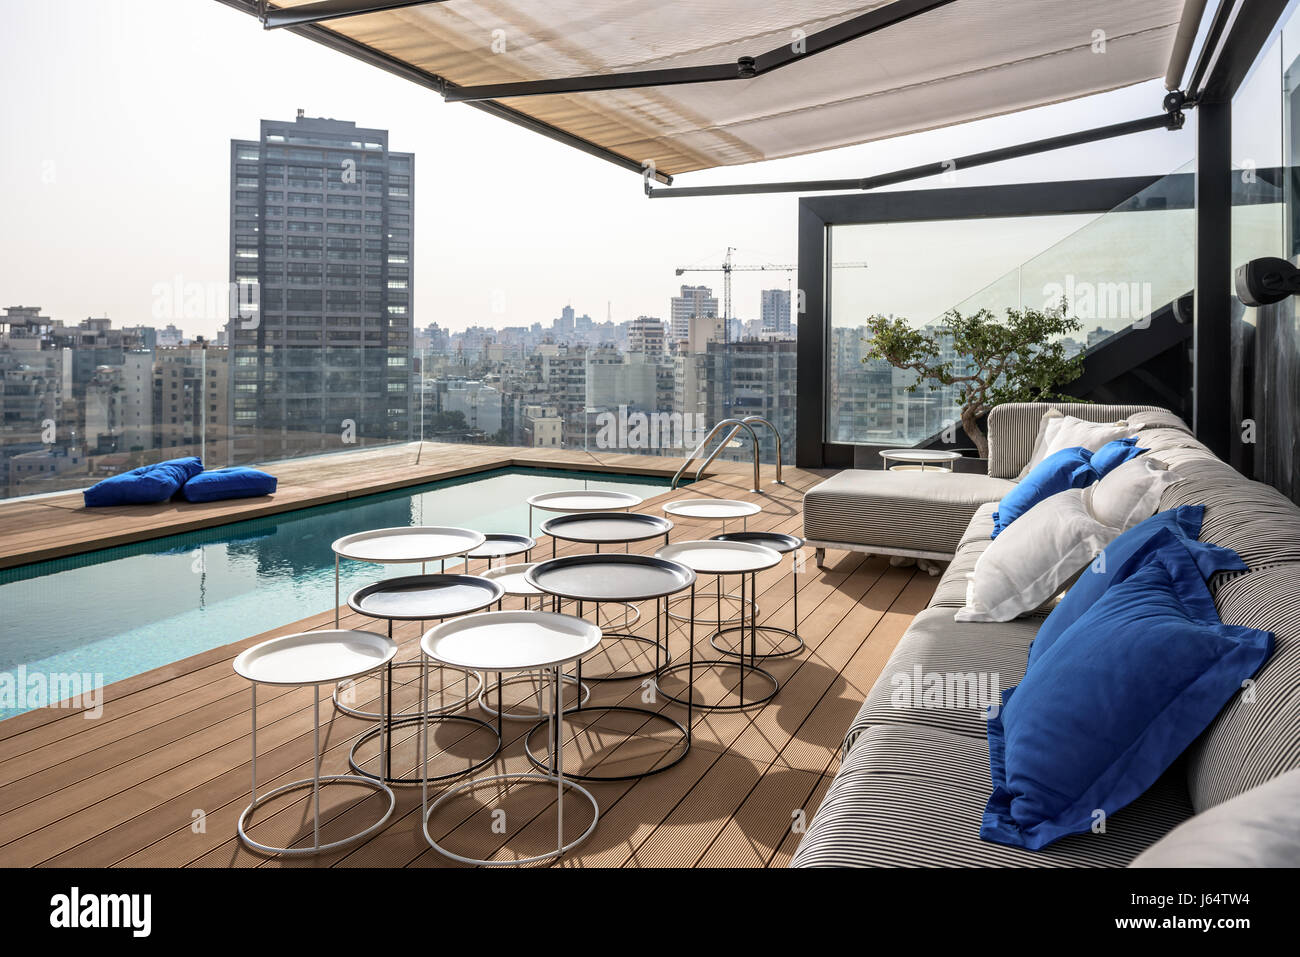 Roof top swimming pool with views of Beirut Stock Photo